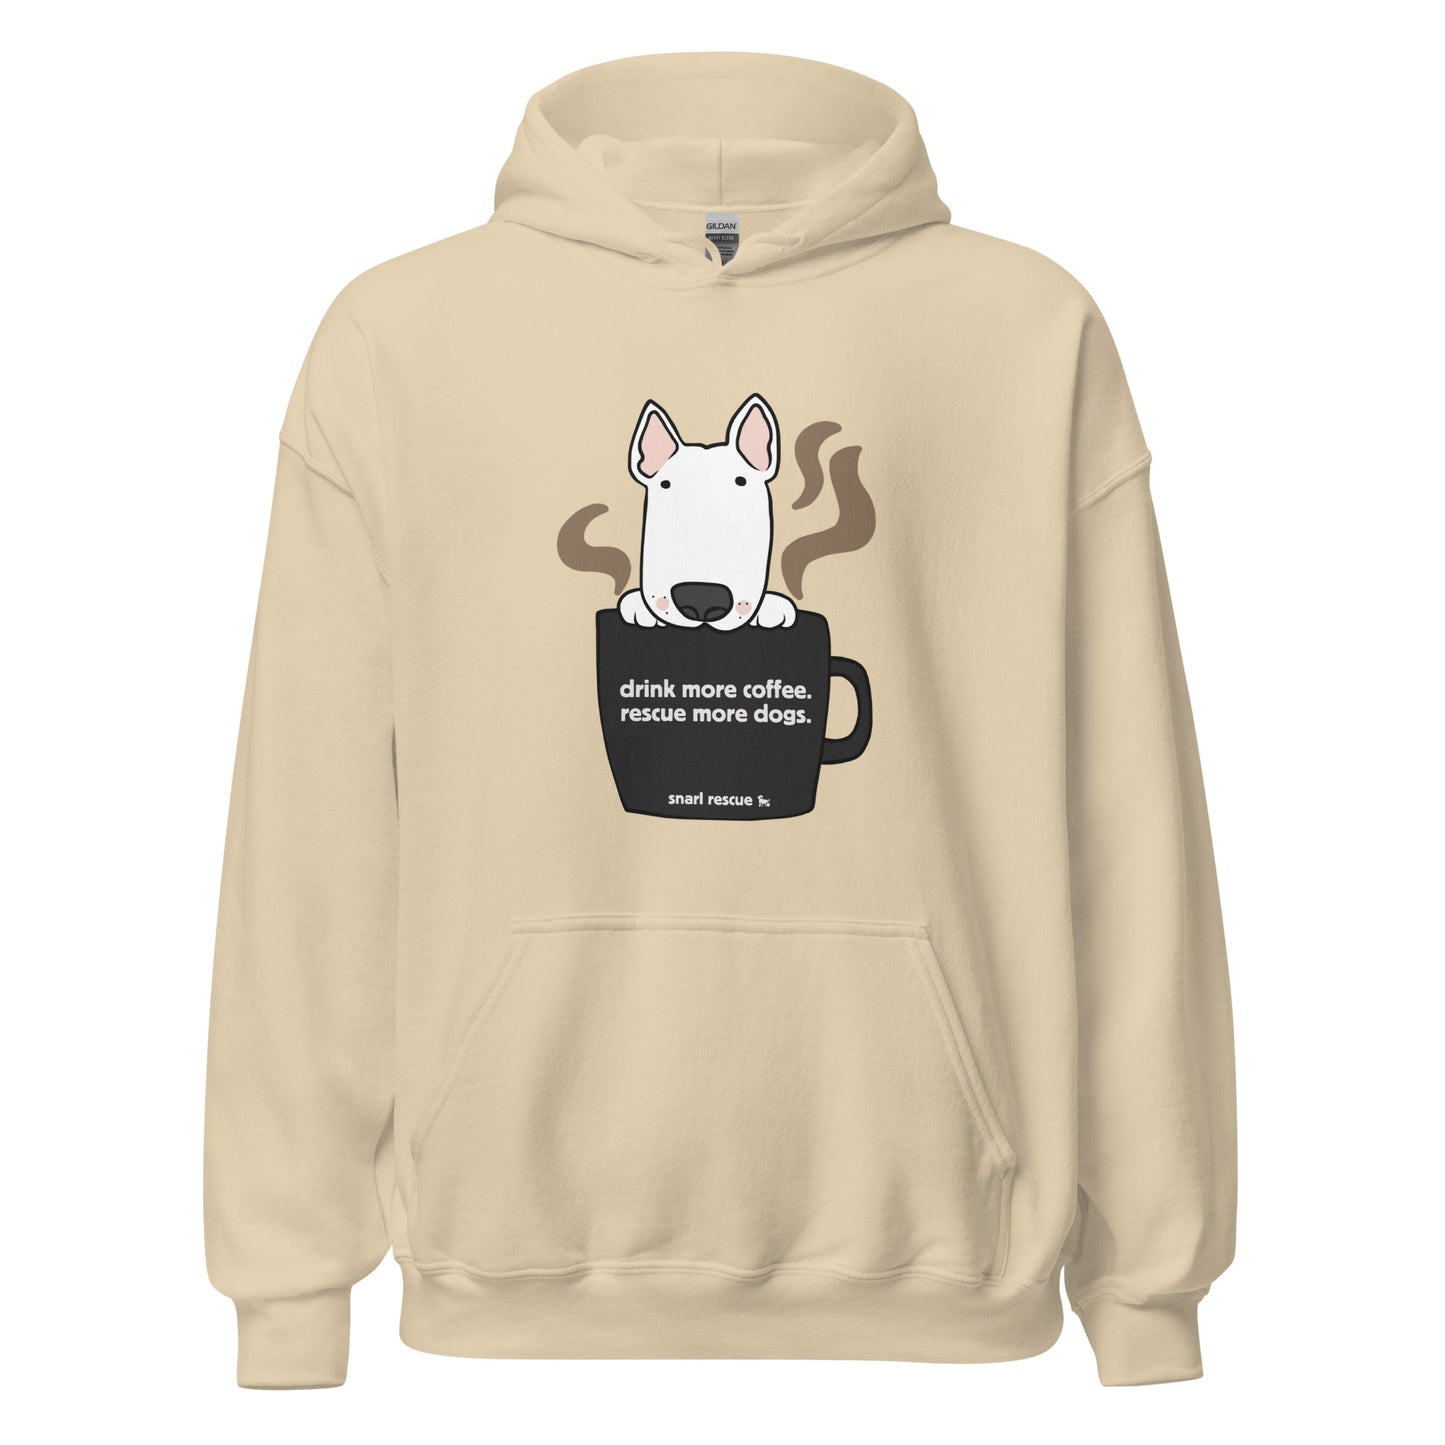 The More Coffee, More Rescue Dogs Hoodie